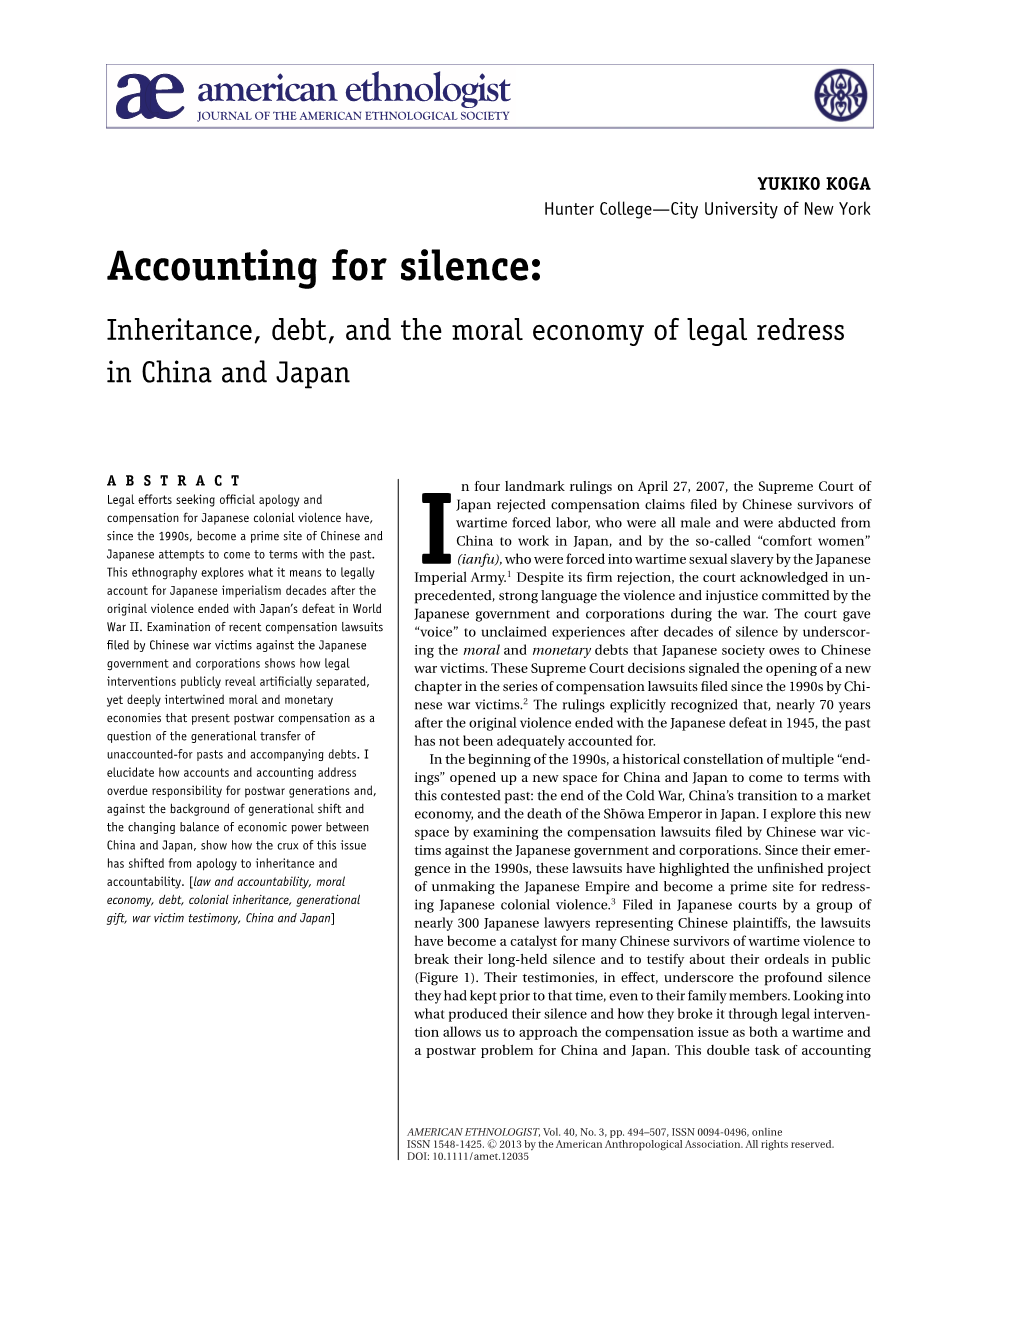 Accounting for Silence/ Inheritance, Debt, and the Moral Economy of Legal Redress in China and Japan